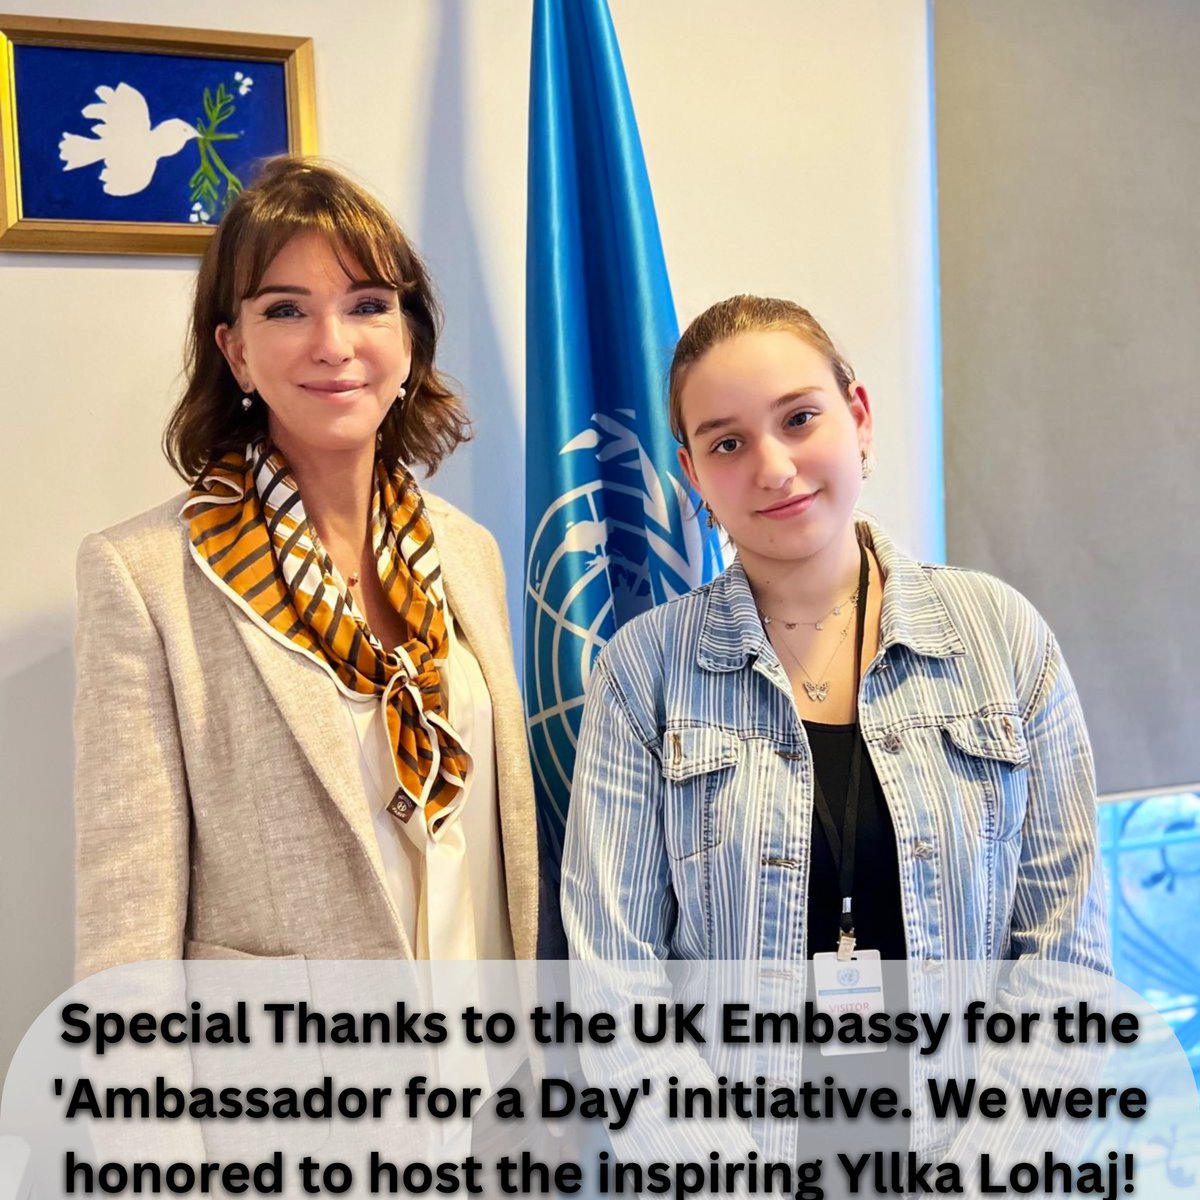 Discussed: Dealing with the past & fostering reconciliation. Young people need inspiring, female role models like Yllka, to drive positive change & build gender equality for all women and girls of  Kosovo. #YouthEmpowerment #InvestInWomen Full story @ tinyurl.com/th38urtx